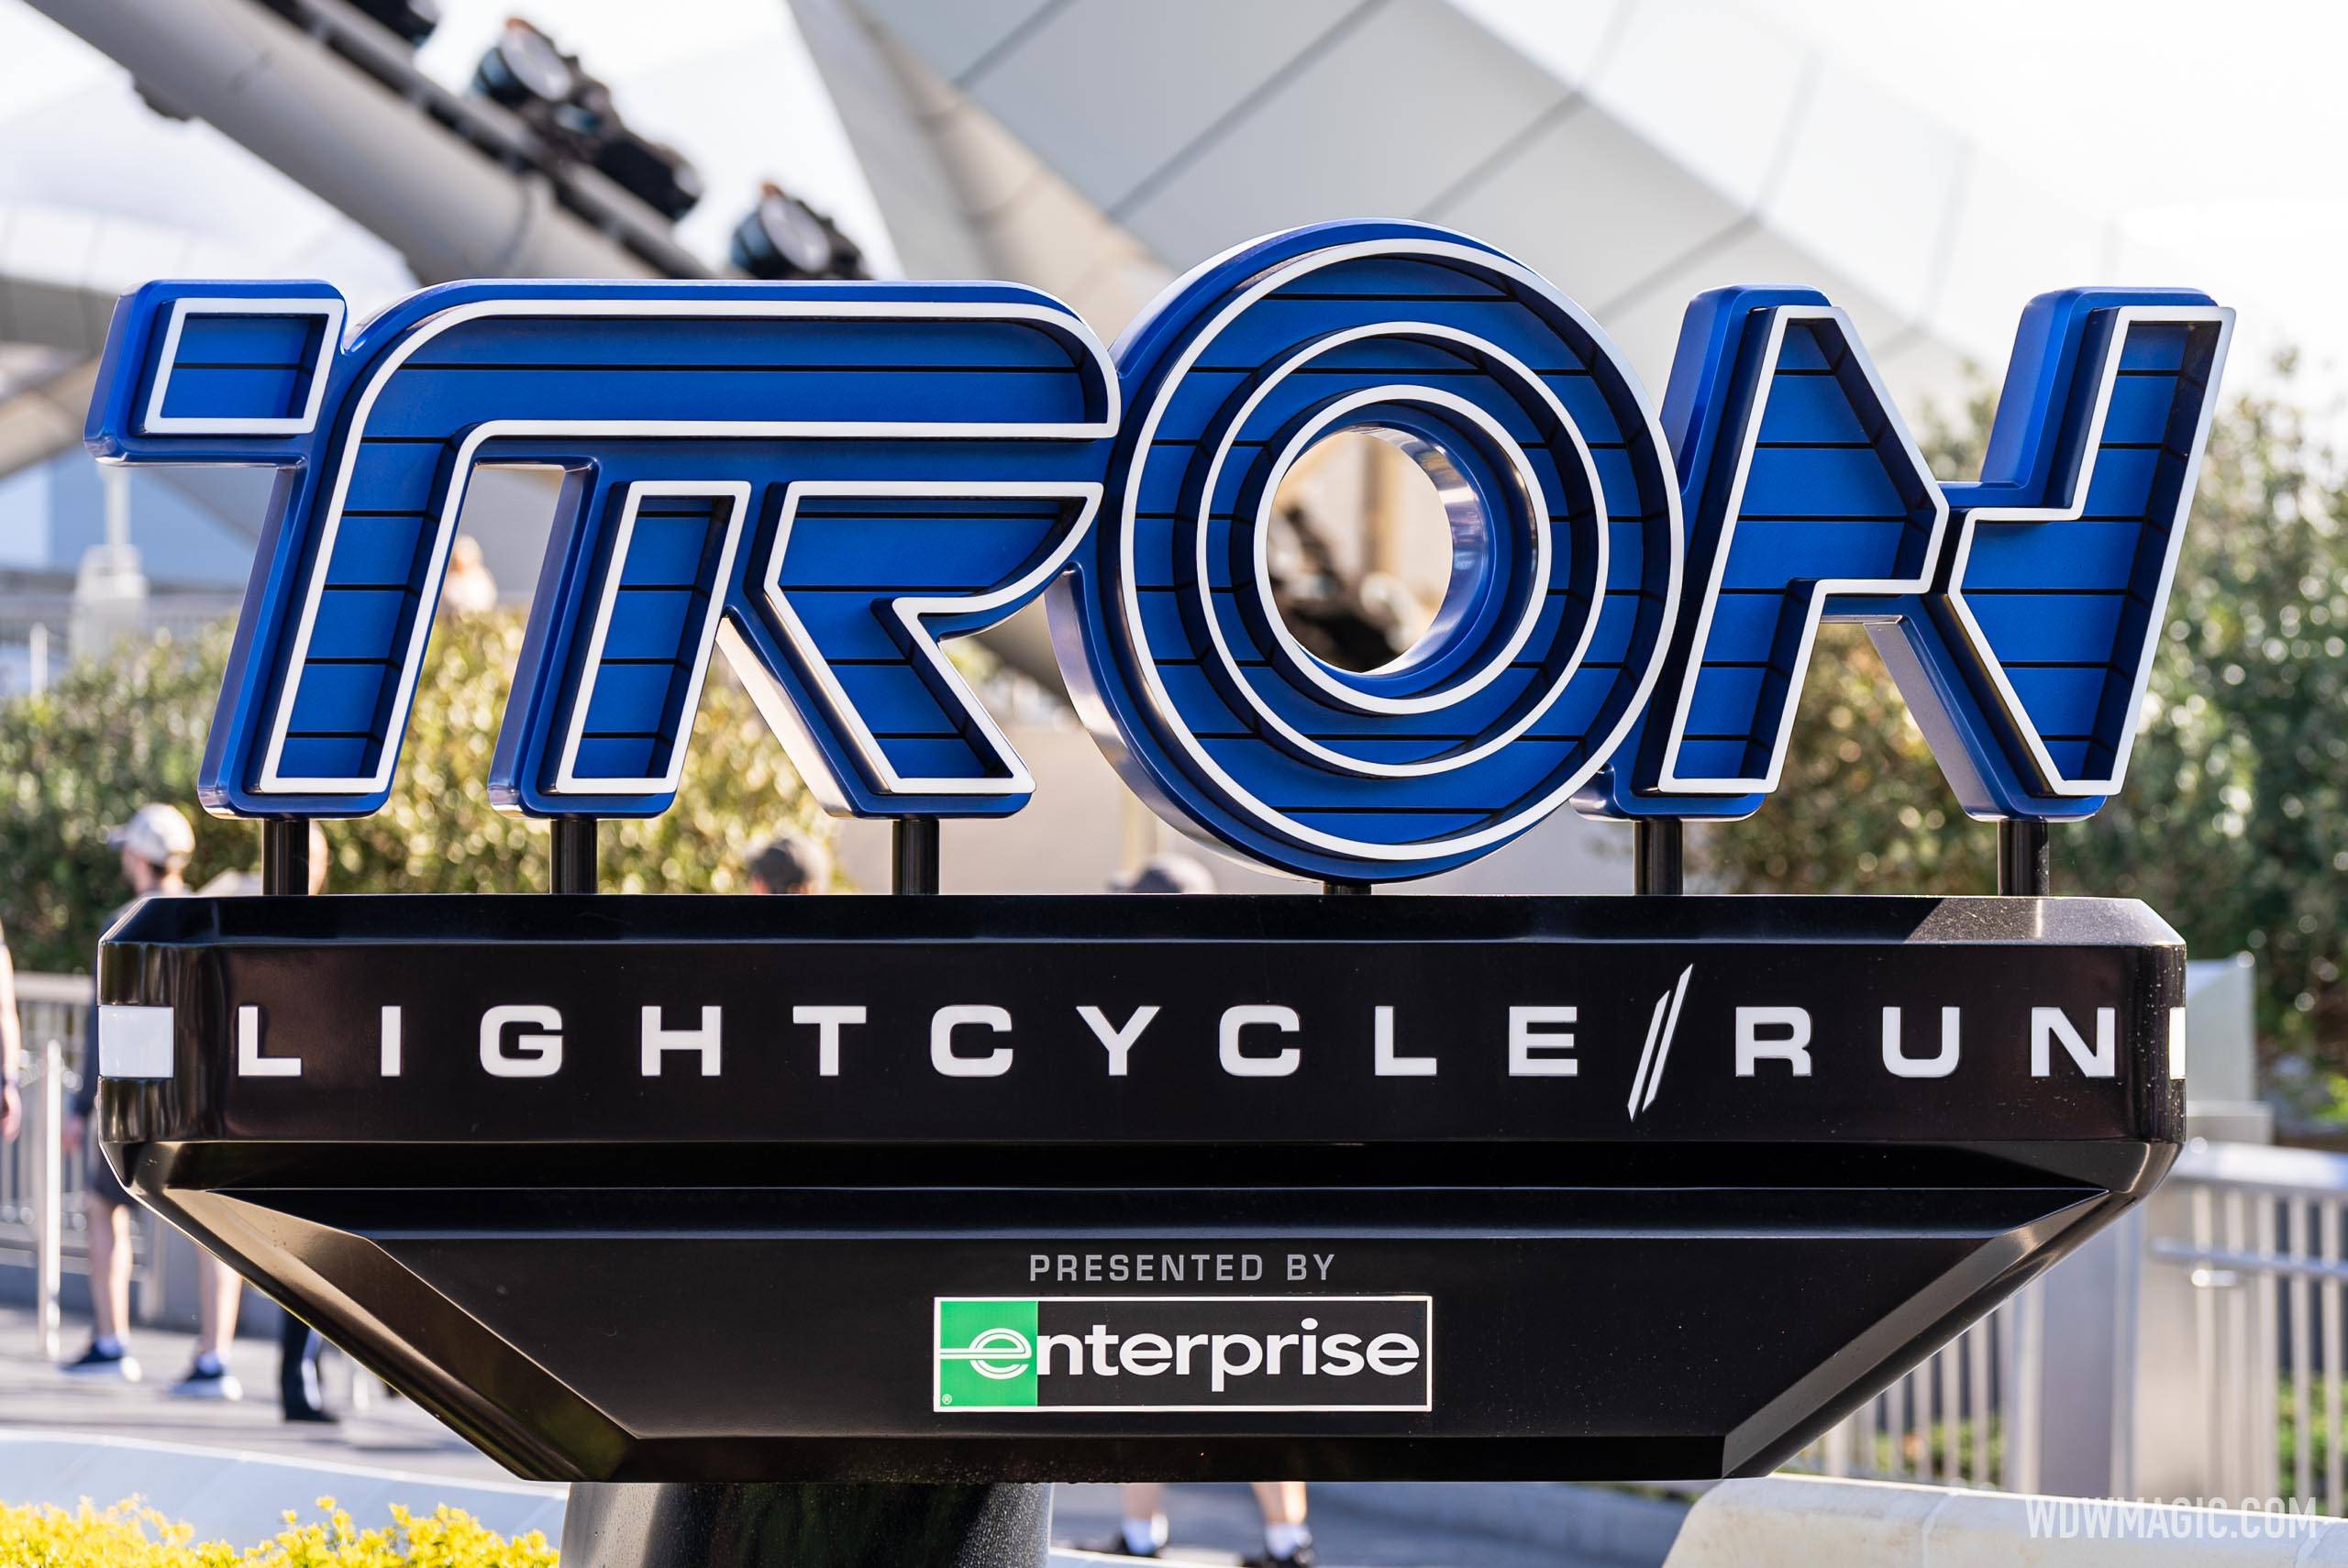 TRON Lightcycle Run officially opens to guests today